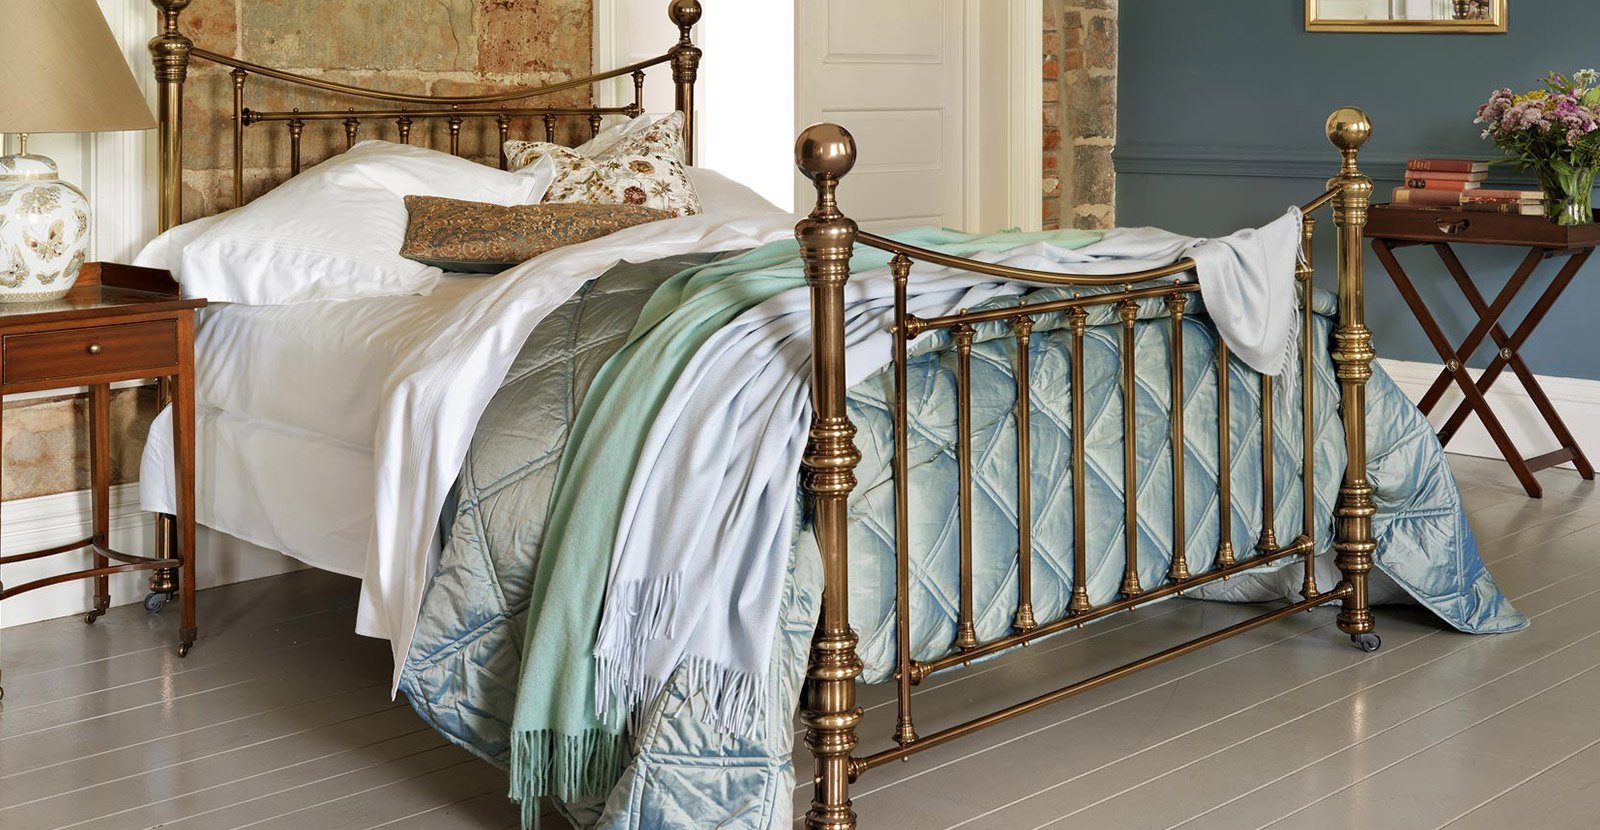 Classic Victorian King Size Brass and Iron Bed 238403 Sellin кровать